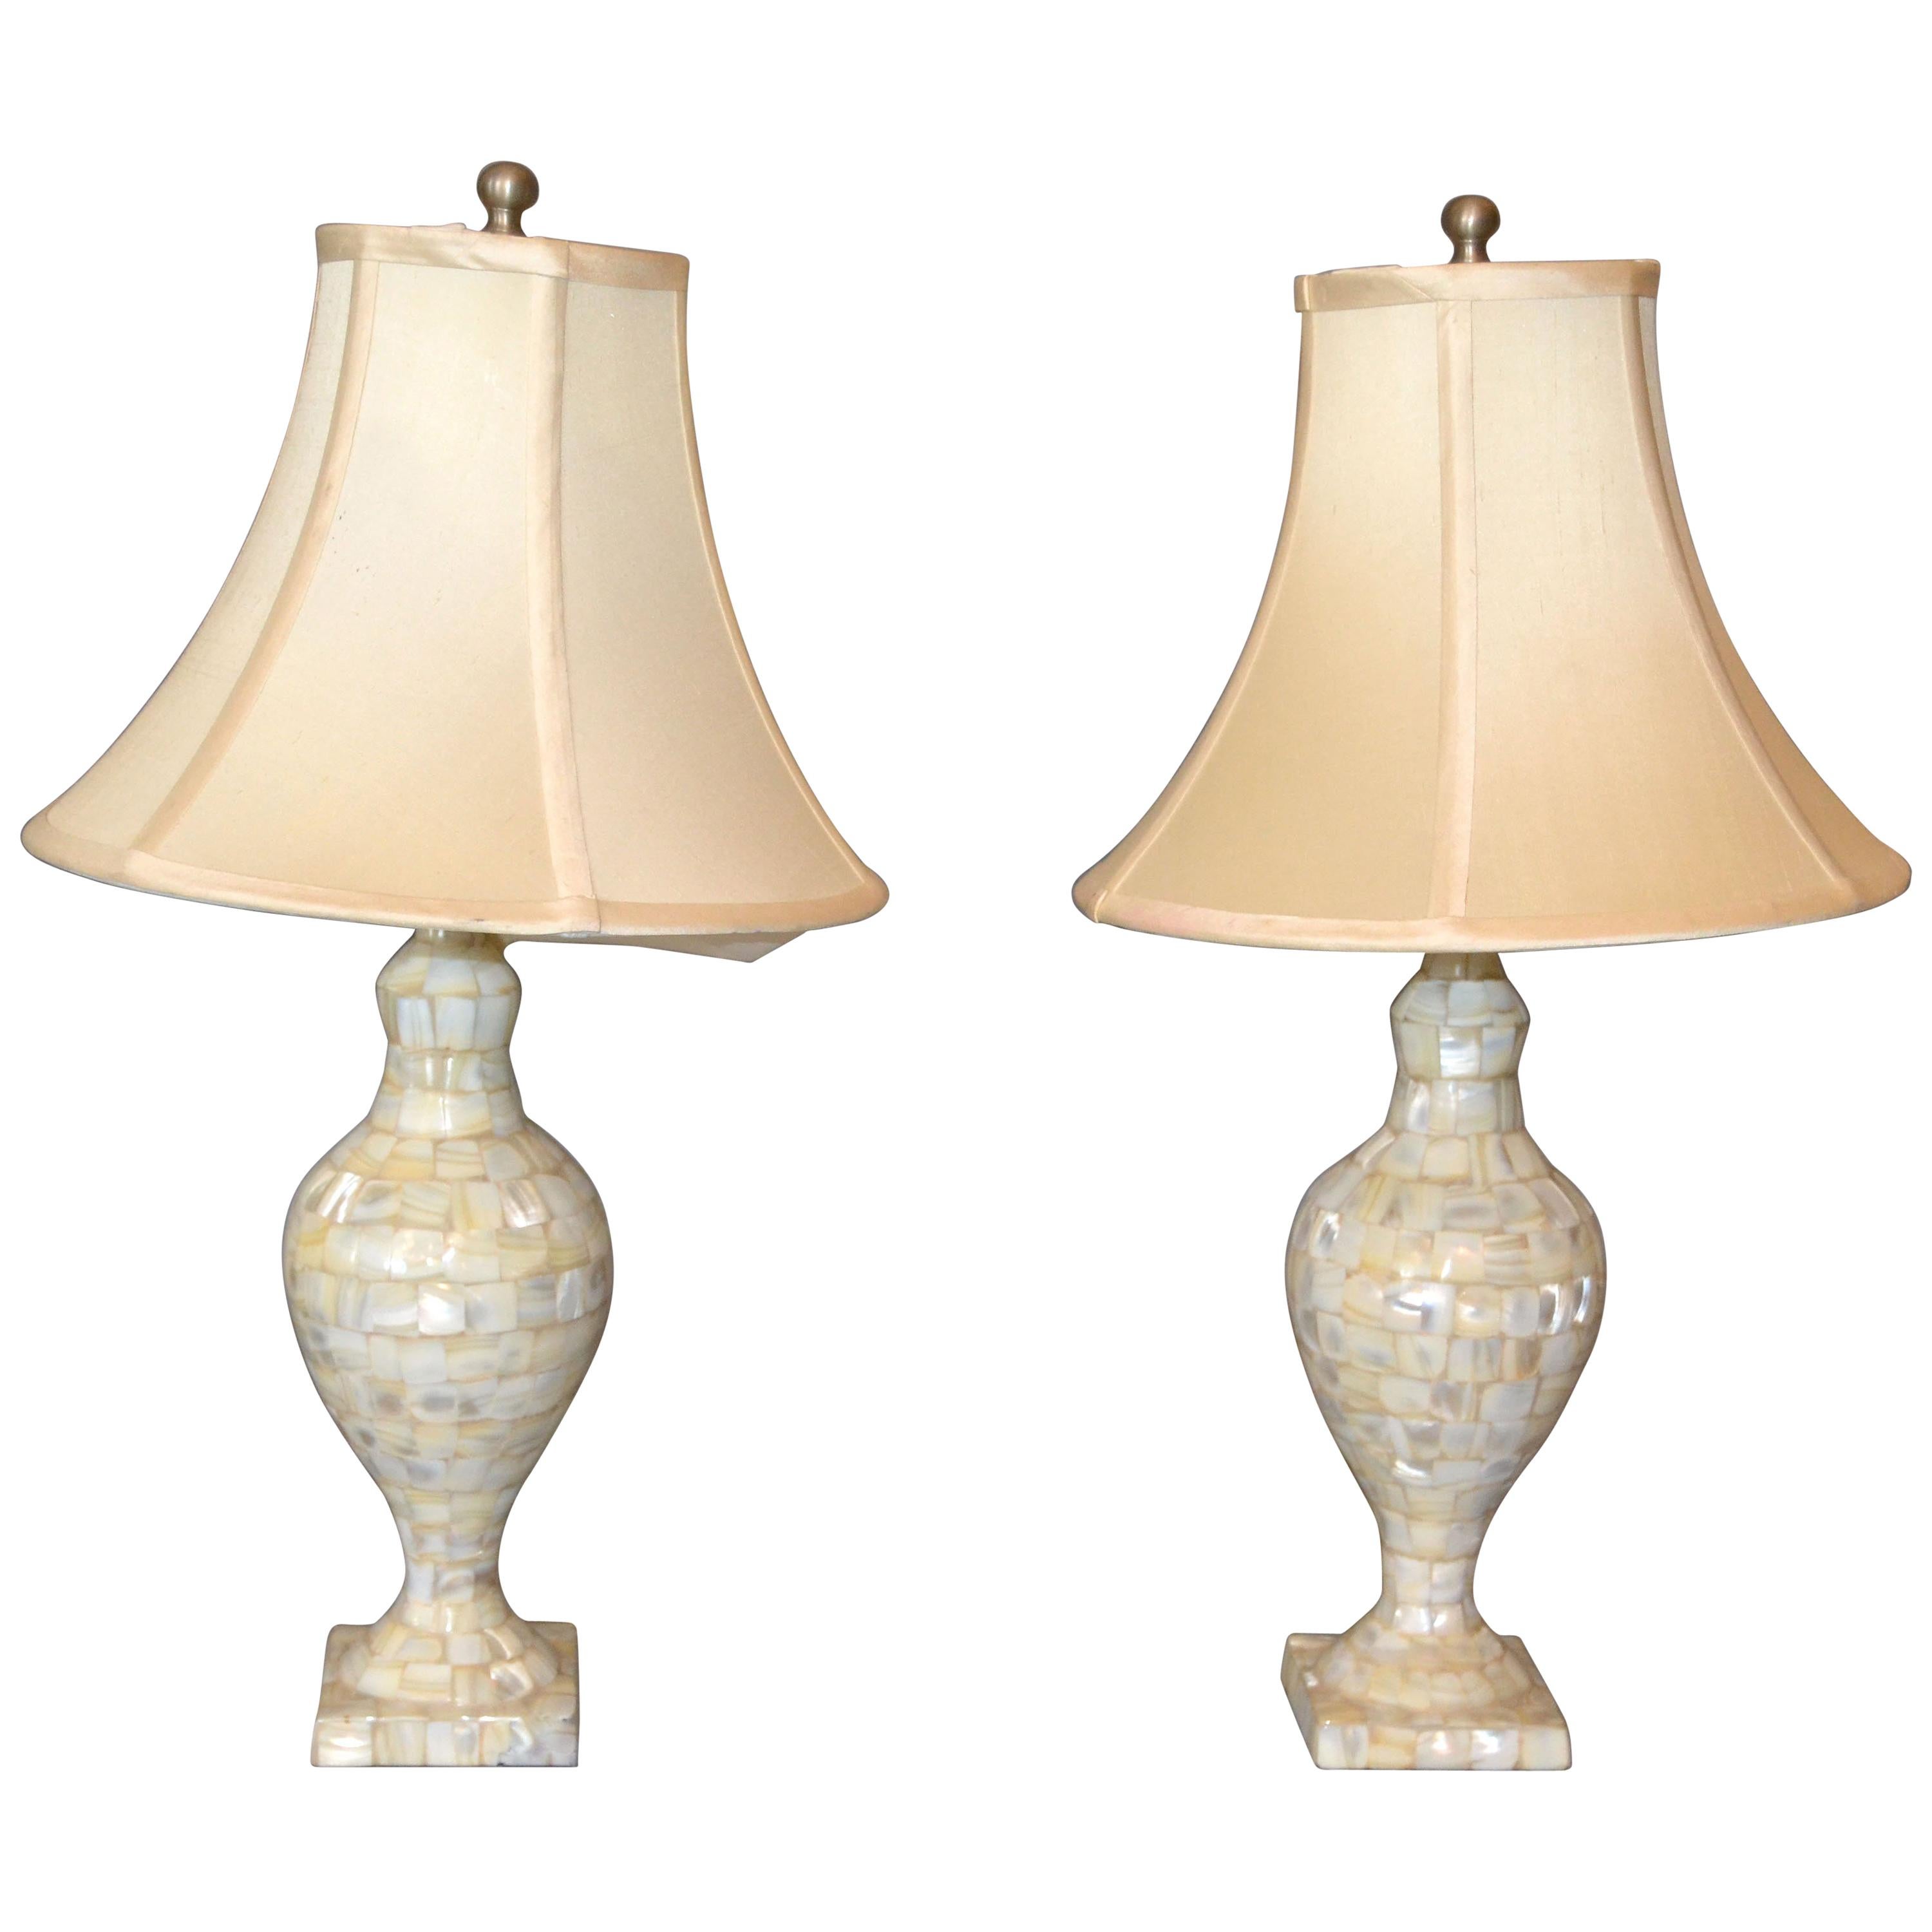 Vintage Capiz Shell Table Lamps with Shades, Pair